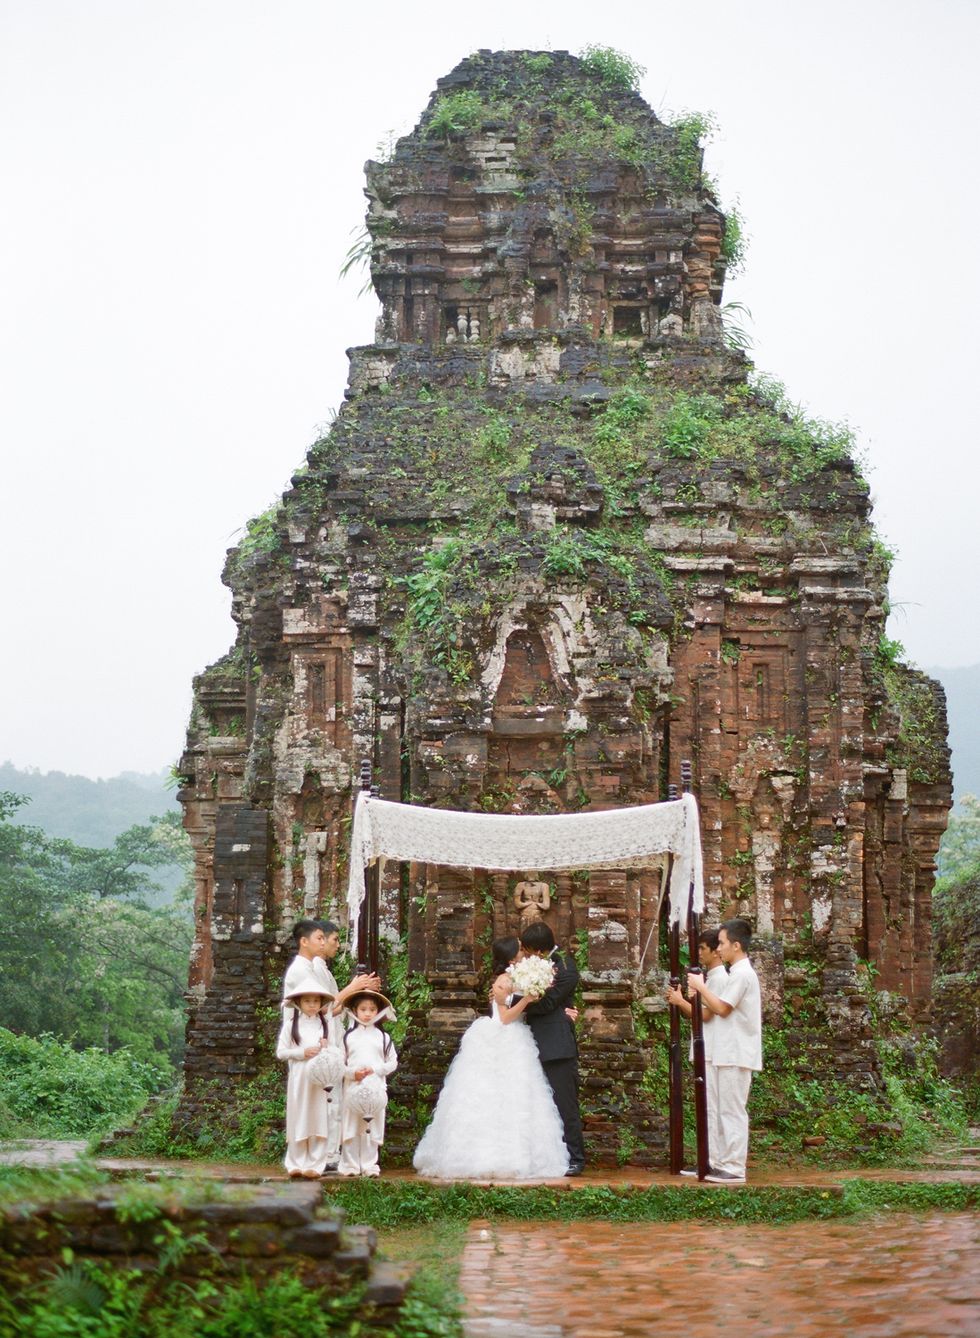 Photograph, Ruins, Bride, Ceremony, Temple, Historic site, Place of worship, Temple, Tree, Building, 